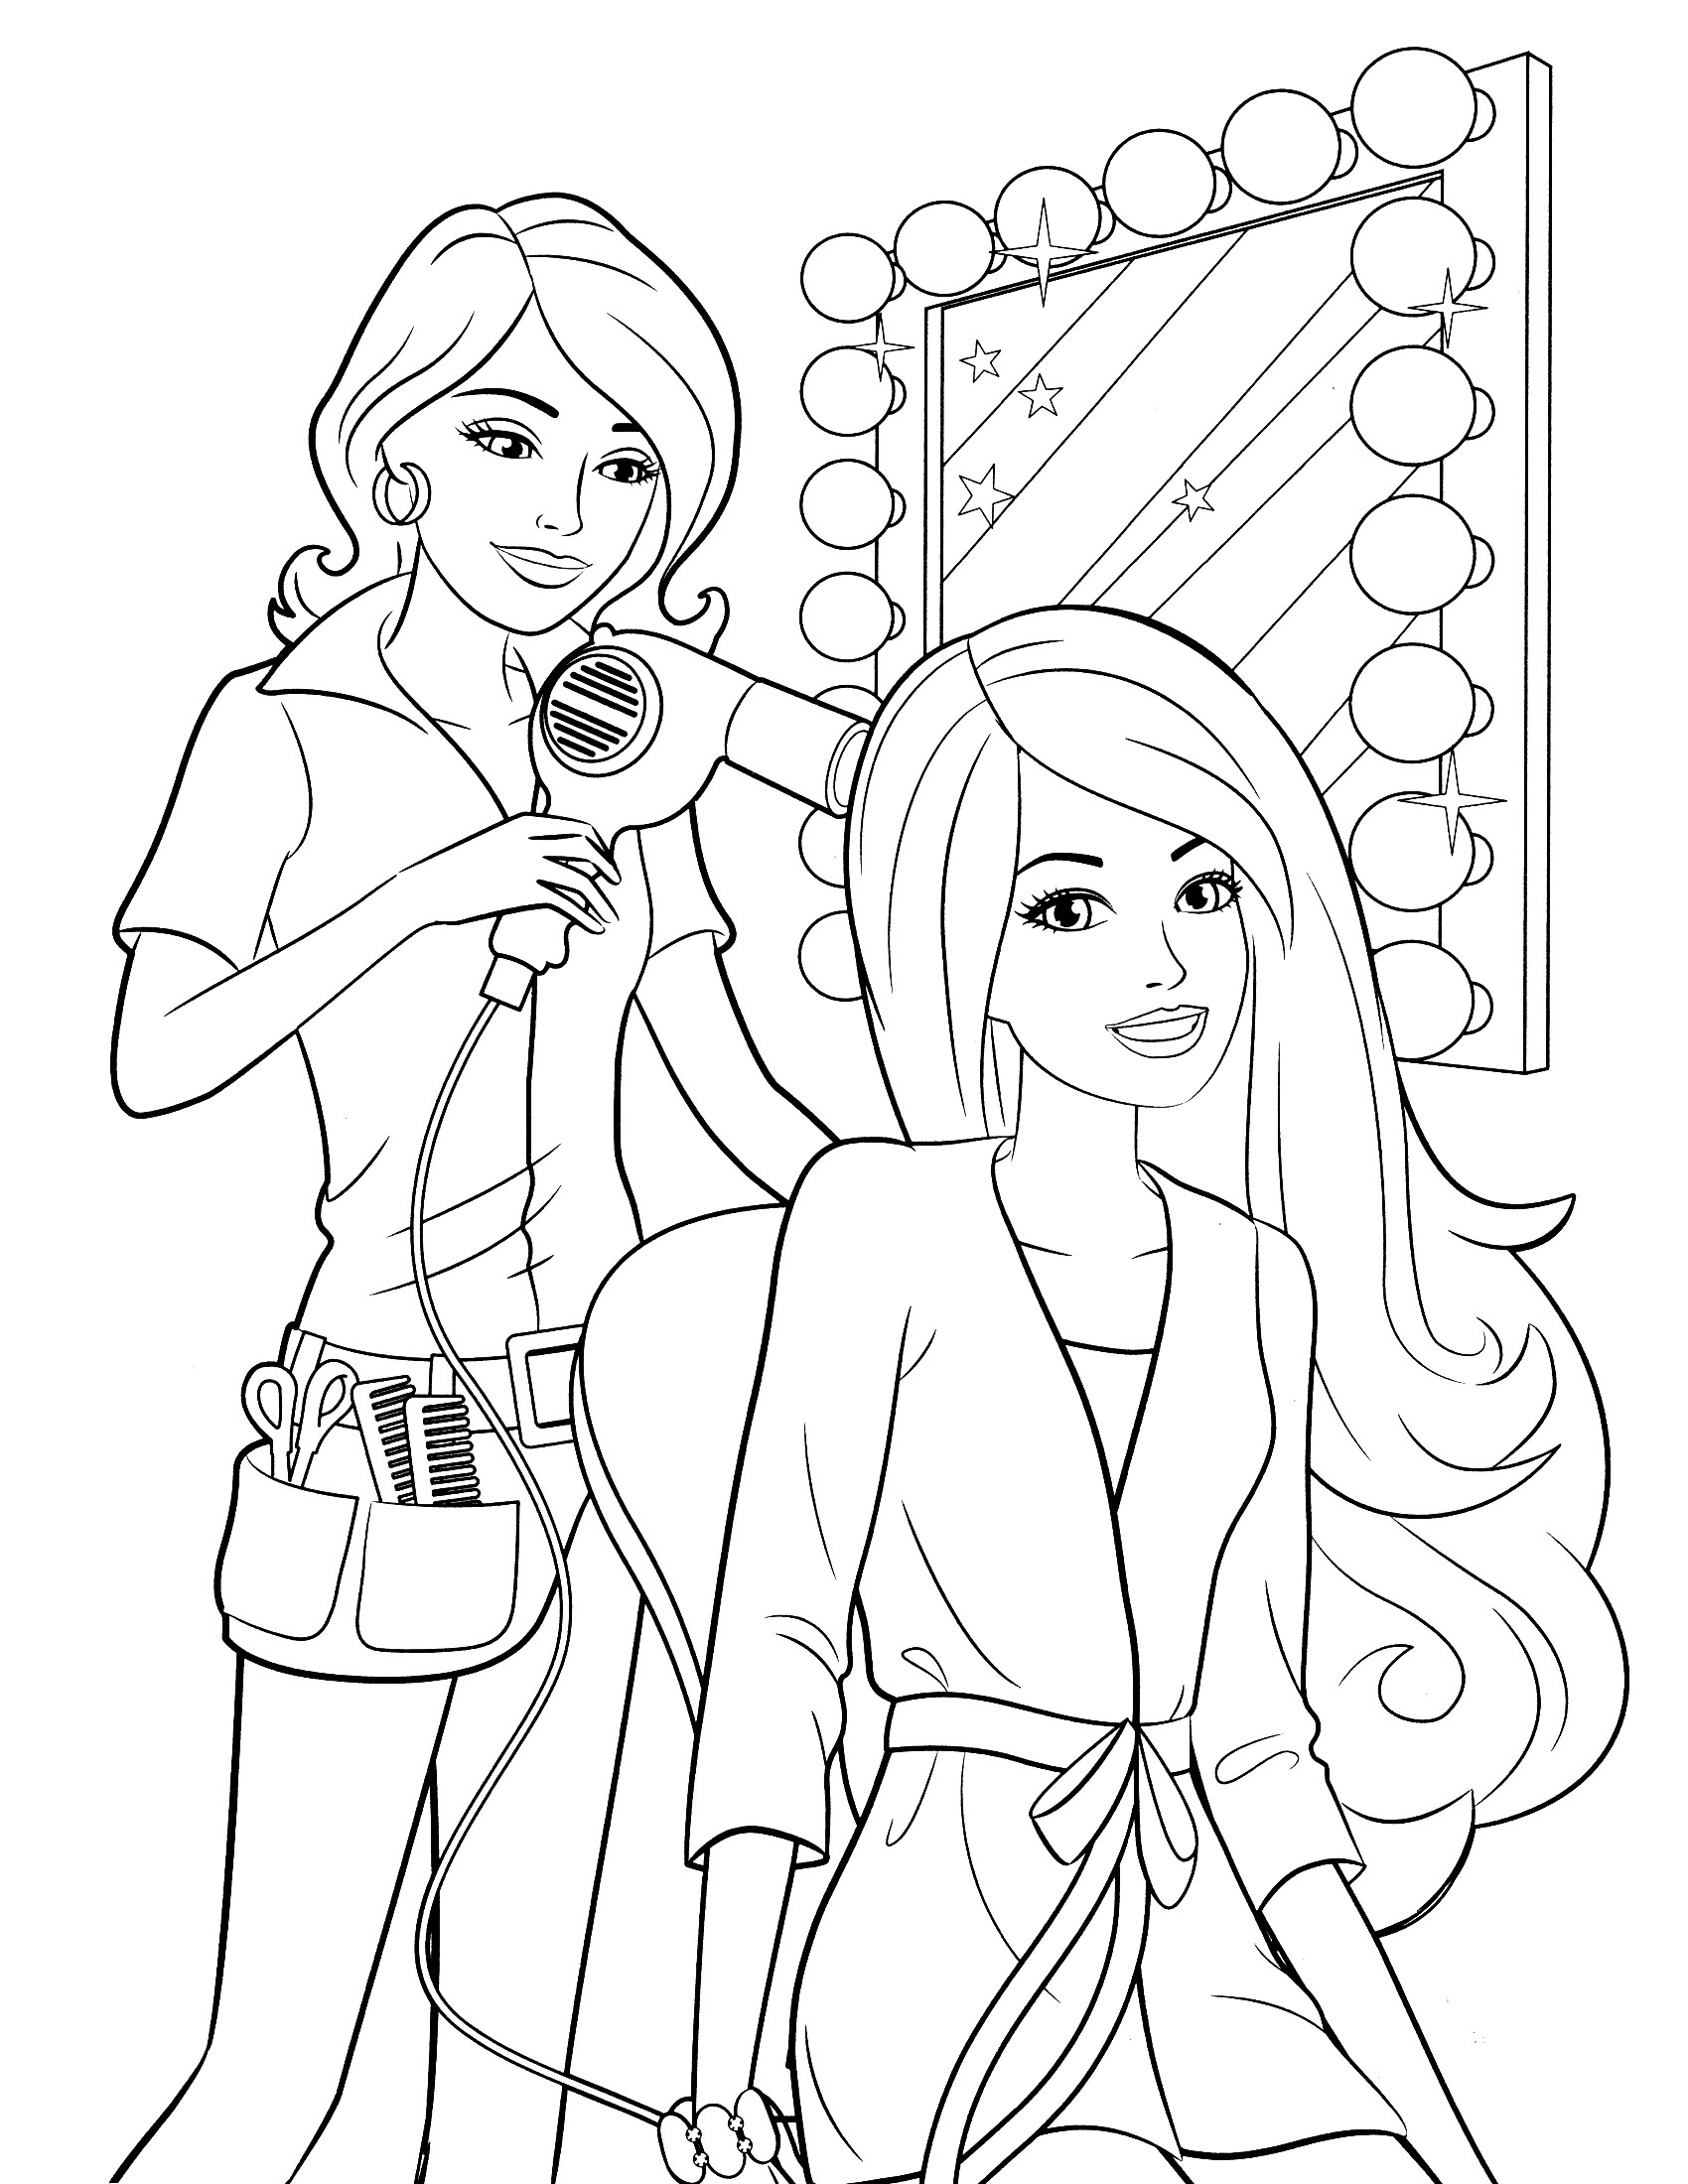 Coloring Book Pages Girls
 Coloring Pages for Girls Best Coloring Pages For Kids